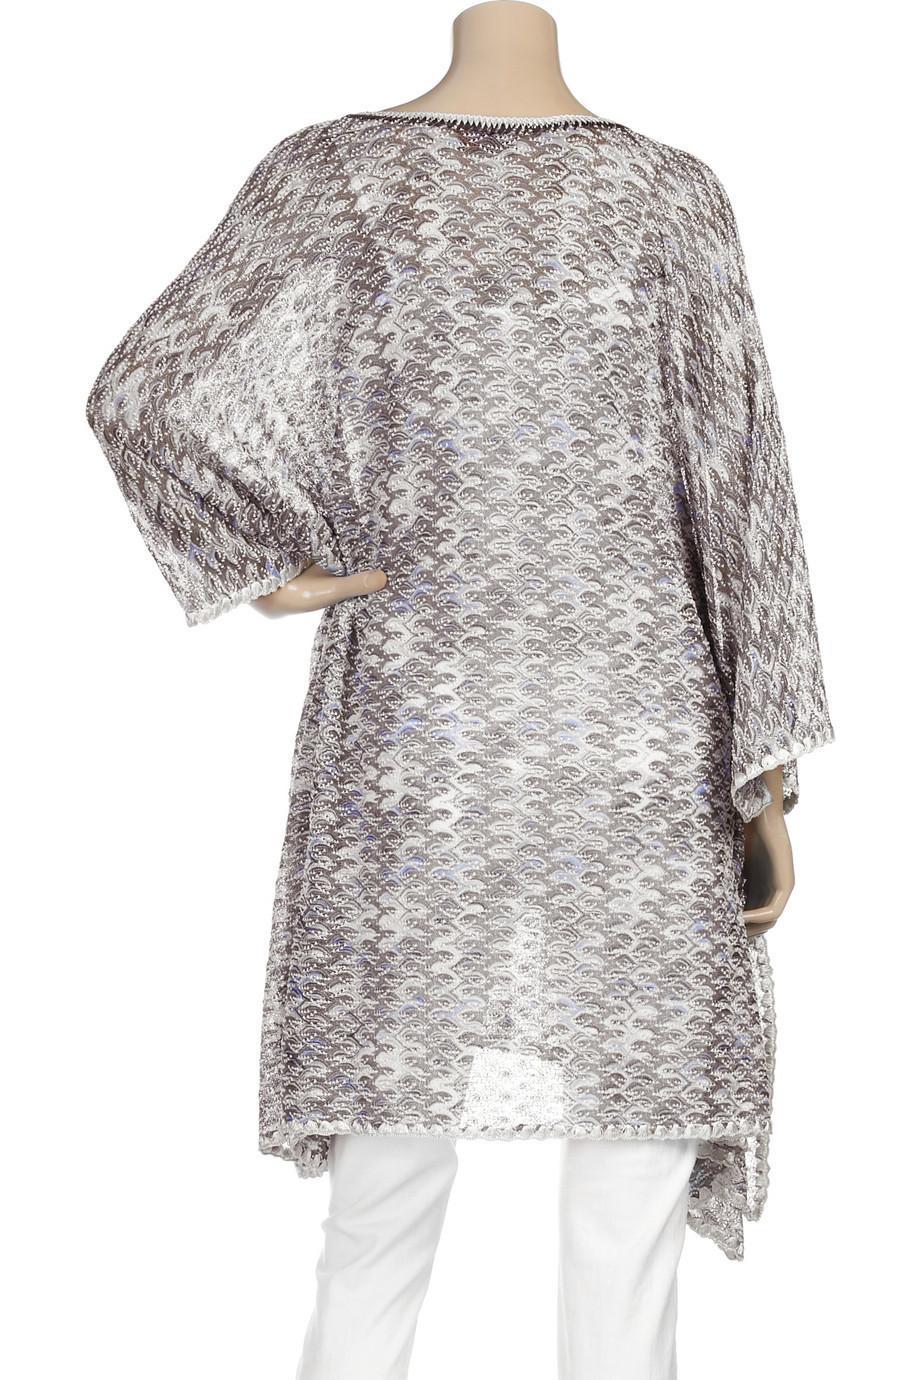 Luxe Missoni knits are perfect vacation wear and are an easy way to add some jet set glamour to your beach look. 

Layer this kaftan over a bikini or wear with jeans for evening.  

Beautiful lurex Missoni kaftan dress
Classic Missoni signature